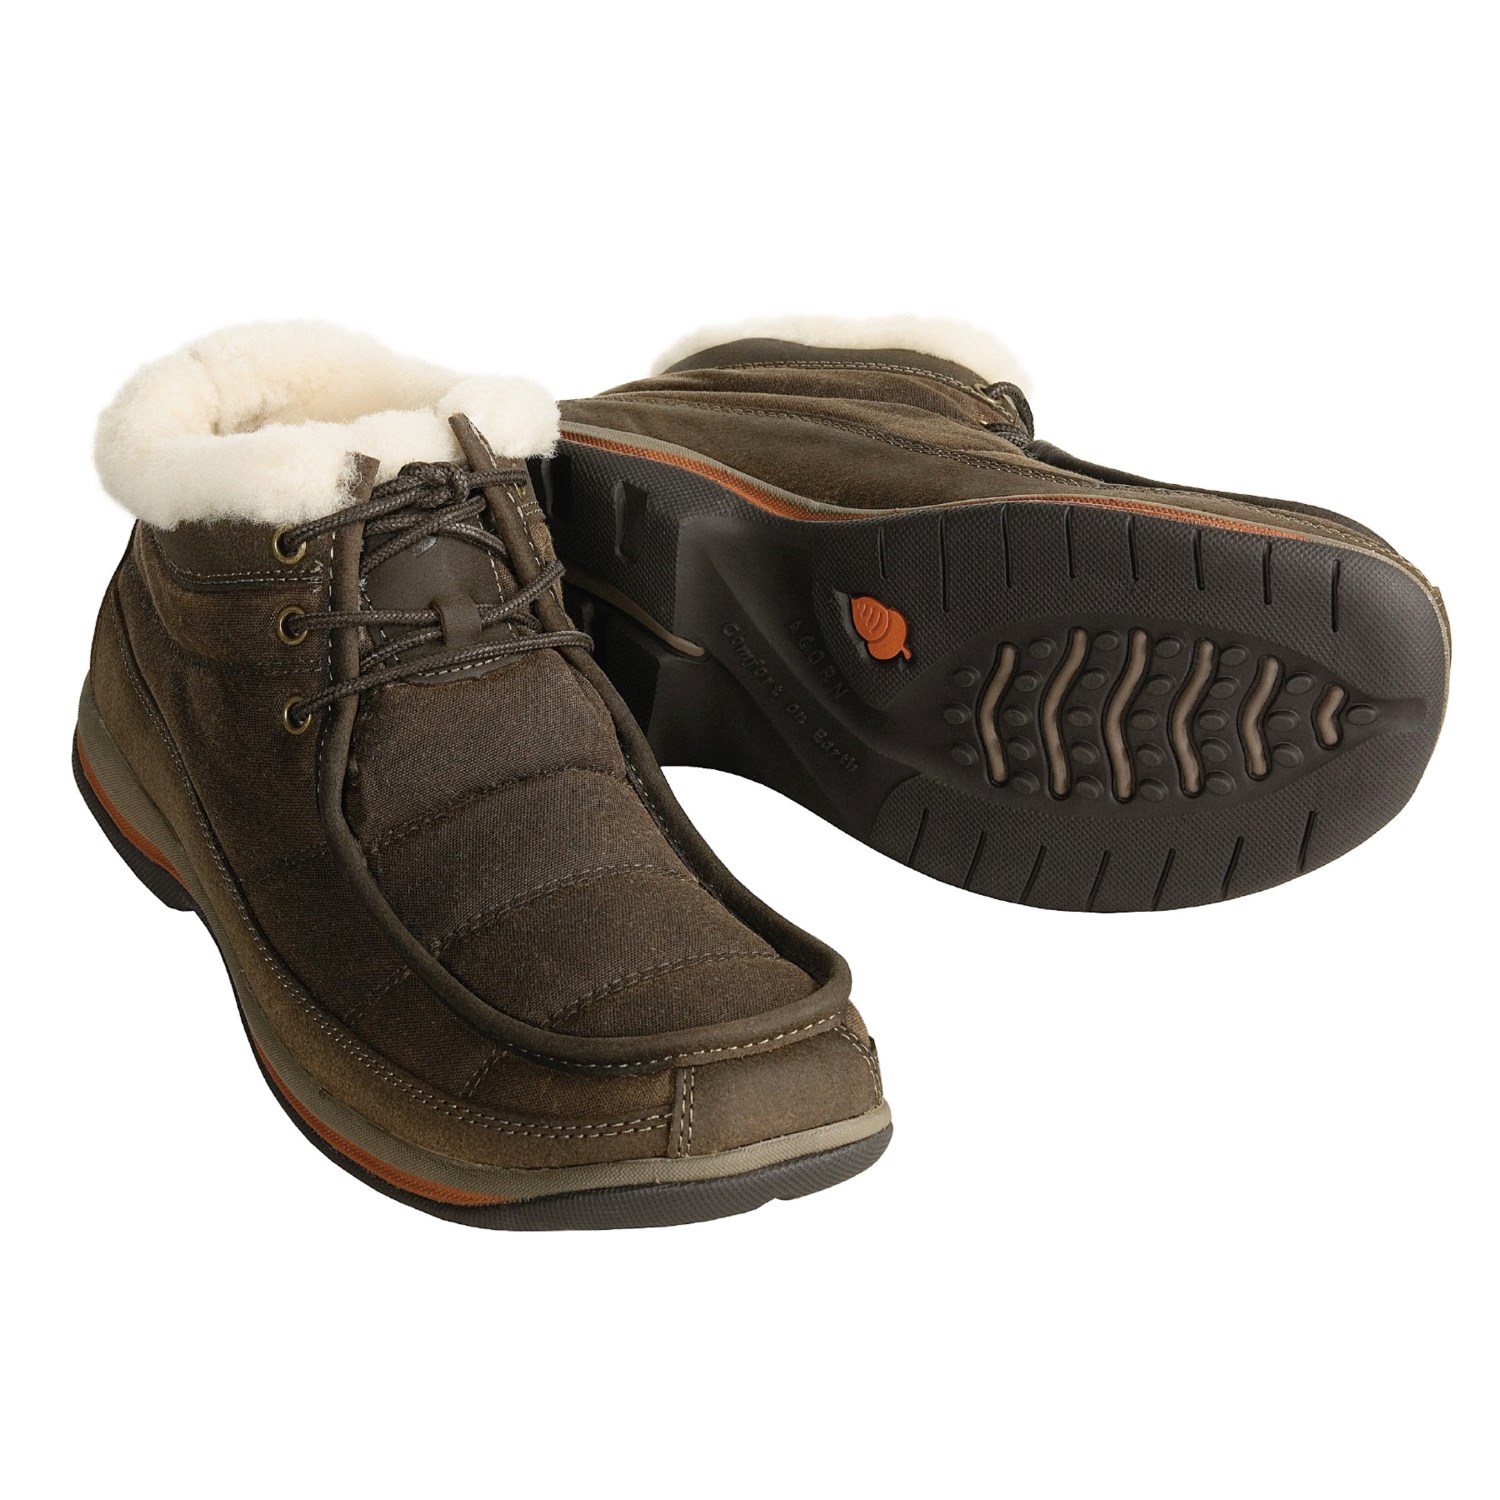 Acorn Anorak Wallaby Boots (For Men) 1121M - Save 39%